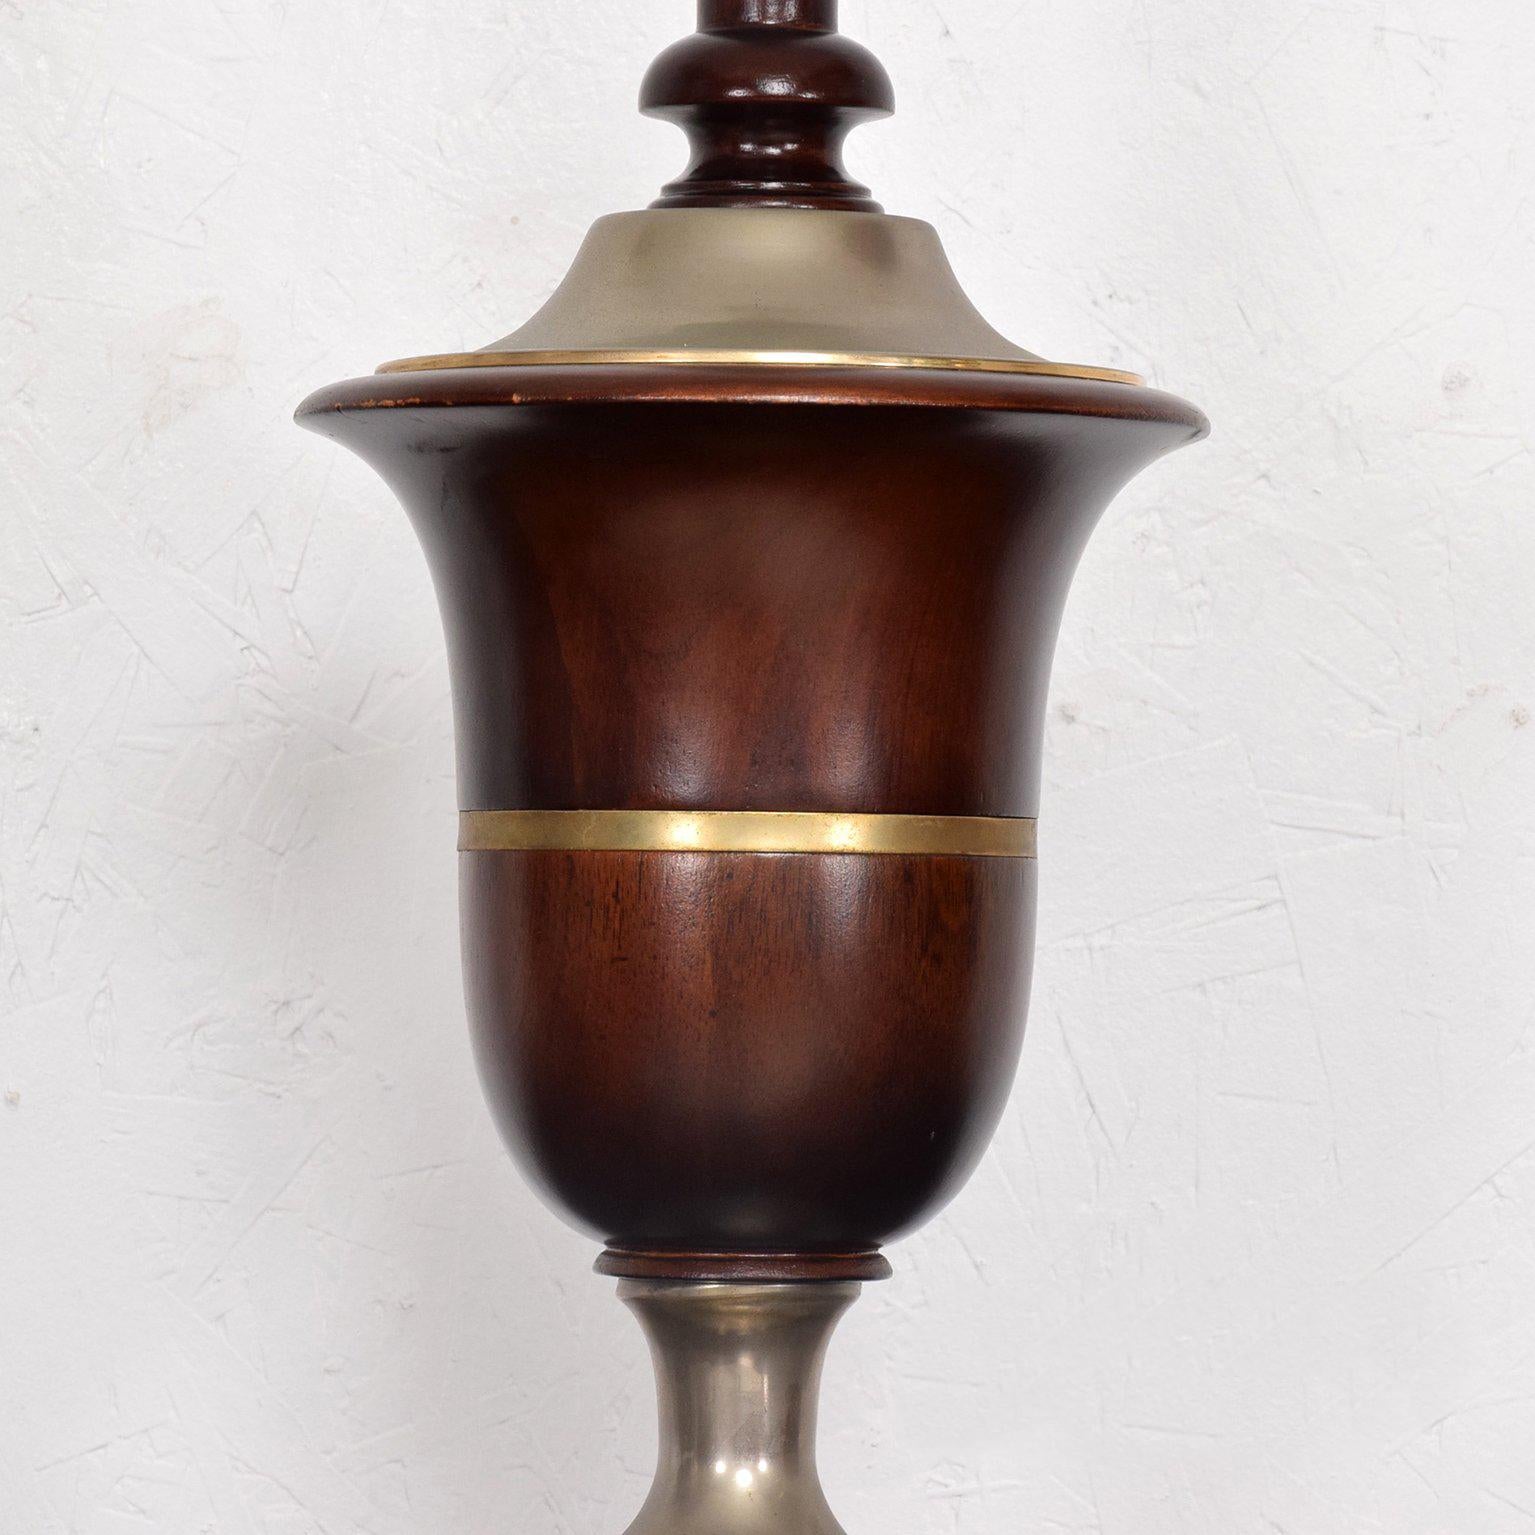 Pair of Neoclassical Table Lamps in Mahogany & Nickel-Plated, Mexican Modernist 4